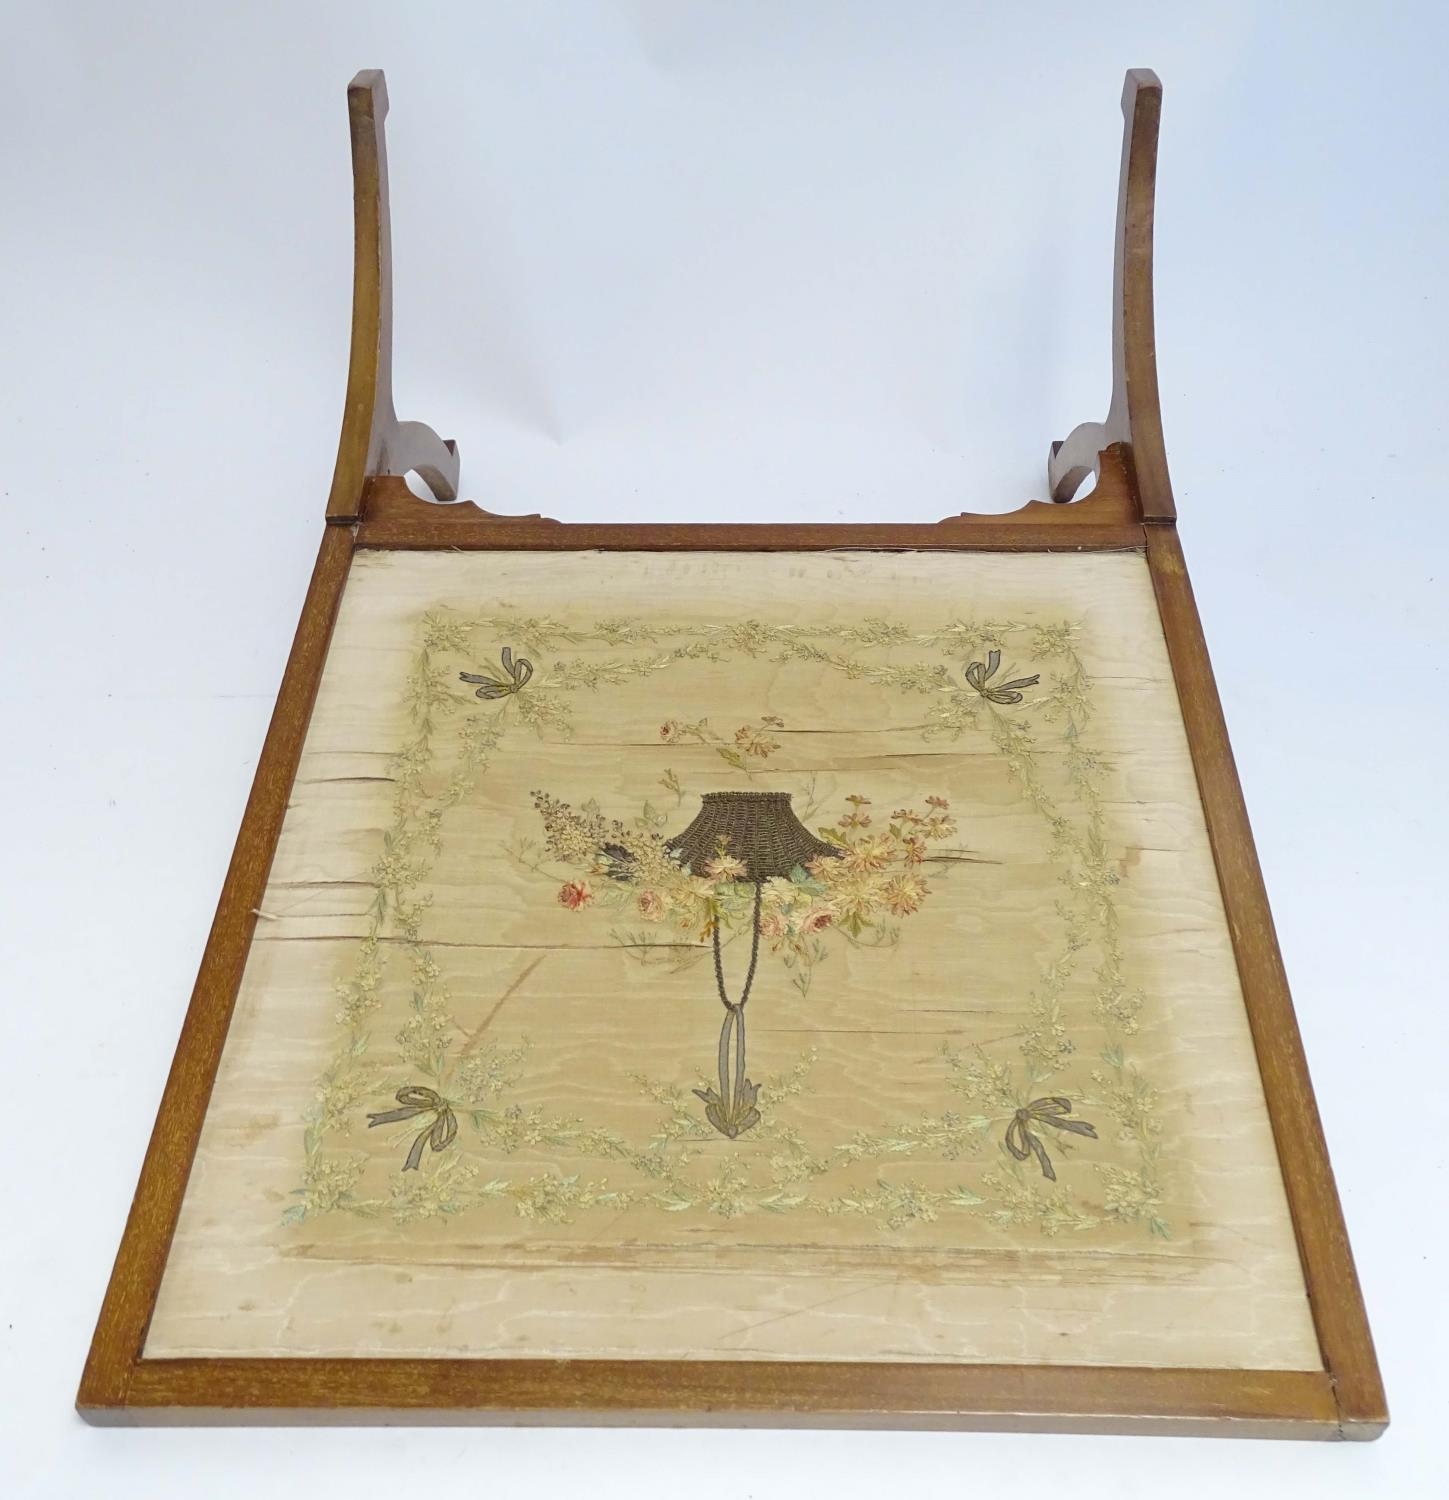 An early 19thC silk needlework with fine floral decoration, bows, swags and a woven basket in a - Image 9 of 10